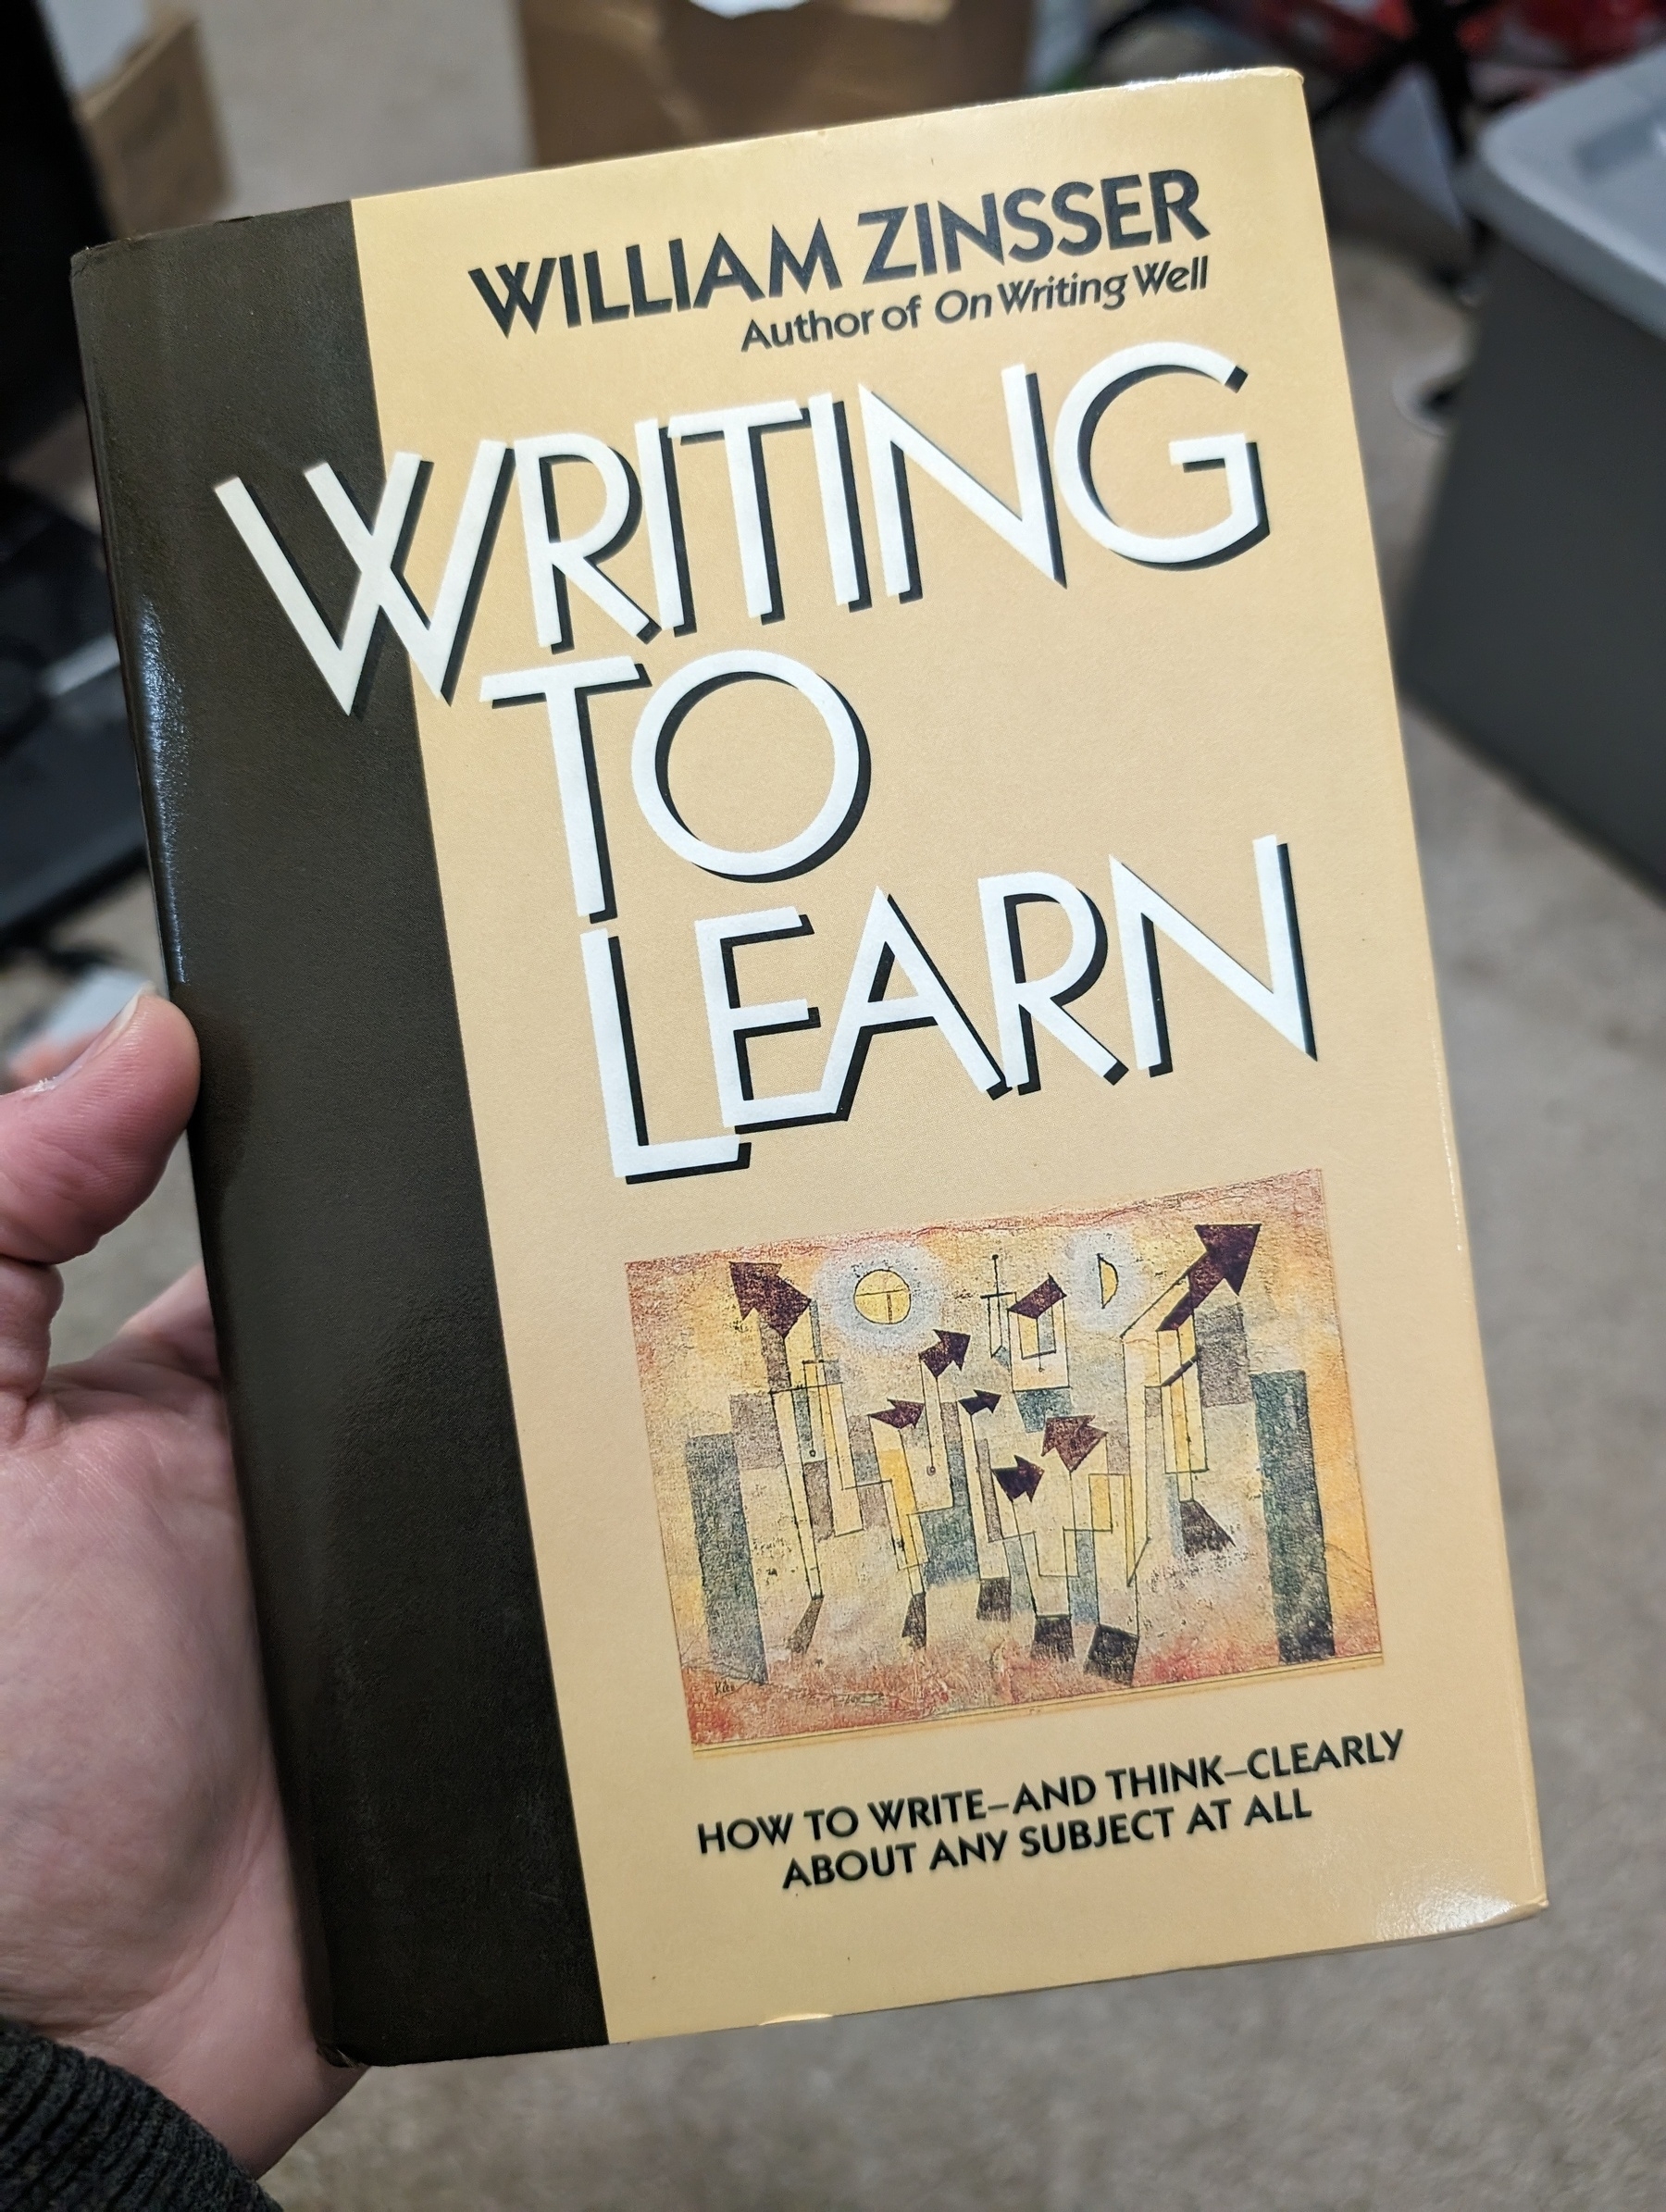 Photo of the book, "Writing to Learn", by William Zinsser. "How to write - and think - clearly about any subject at all"